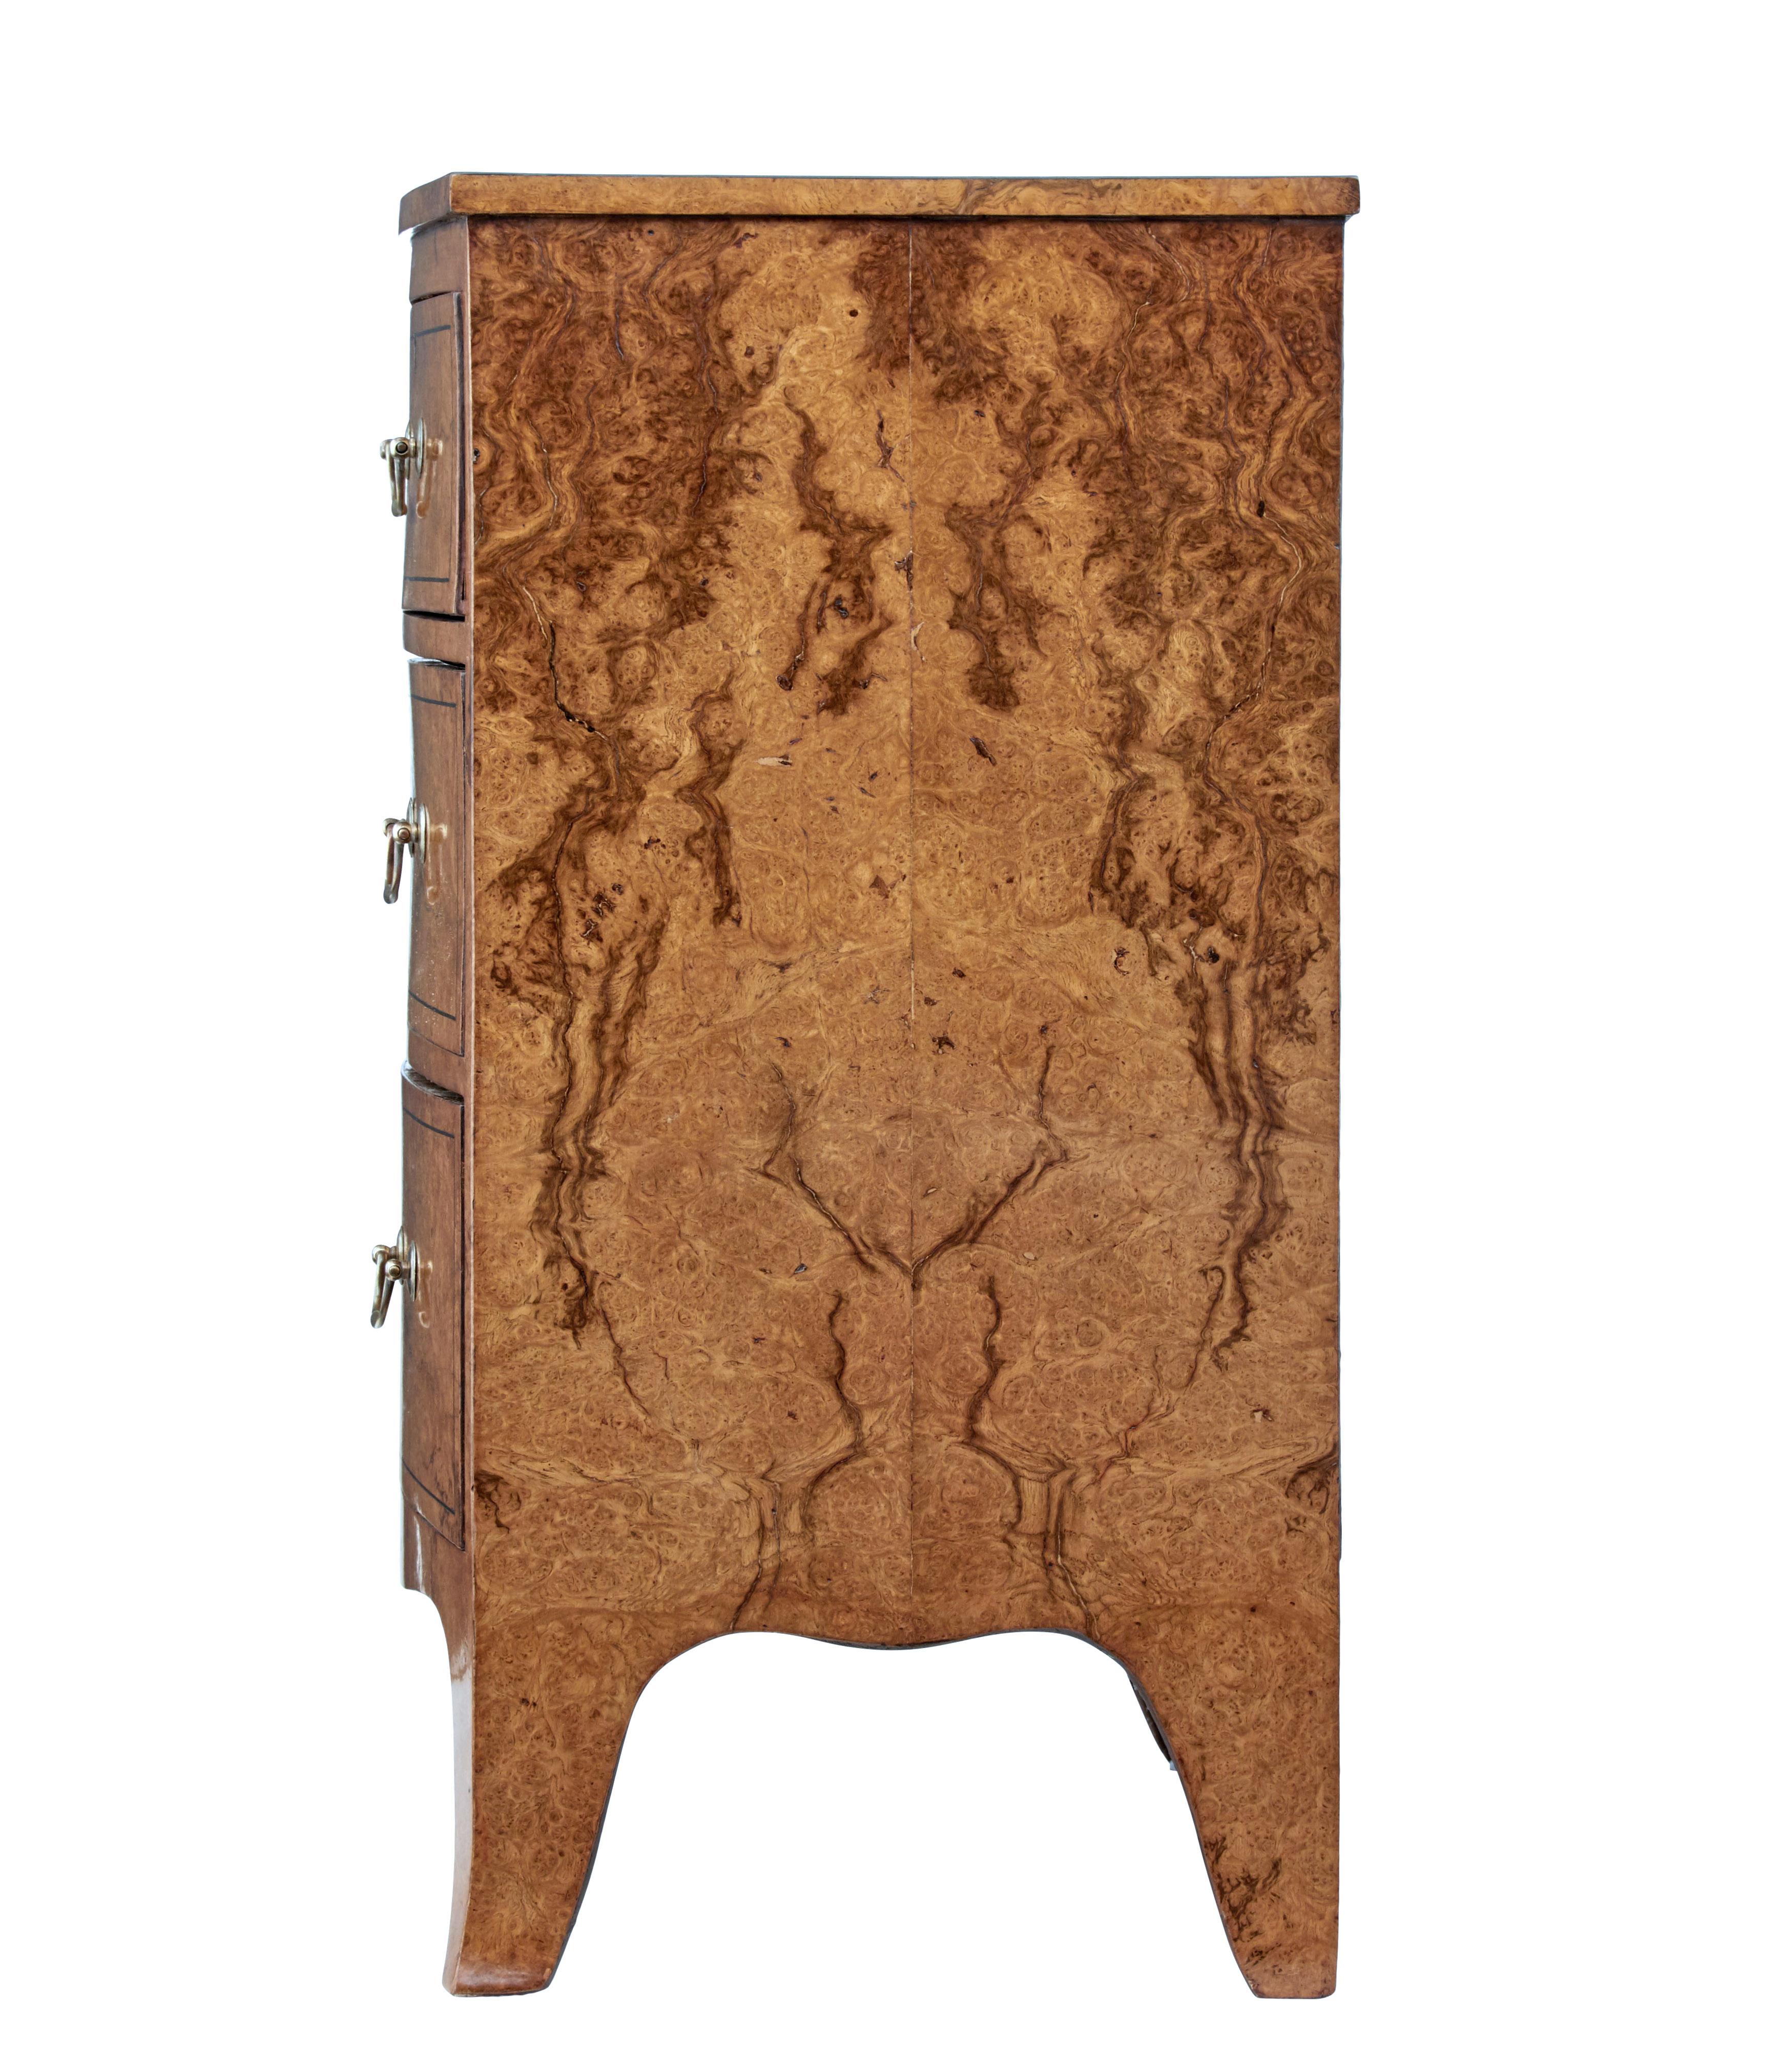 English burr walnut bow front chest circa 1870 with bookmatched veneer on the sides, four drawers, and splayed bracket feet. Delight in the distinguished allure of this English 19th century burr walnut bow front chest of drawers, circa 1870. This